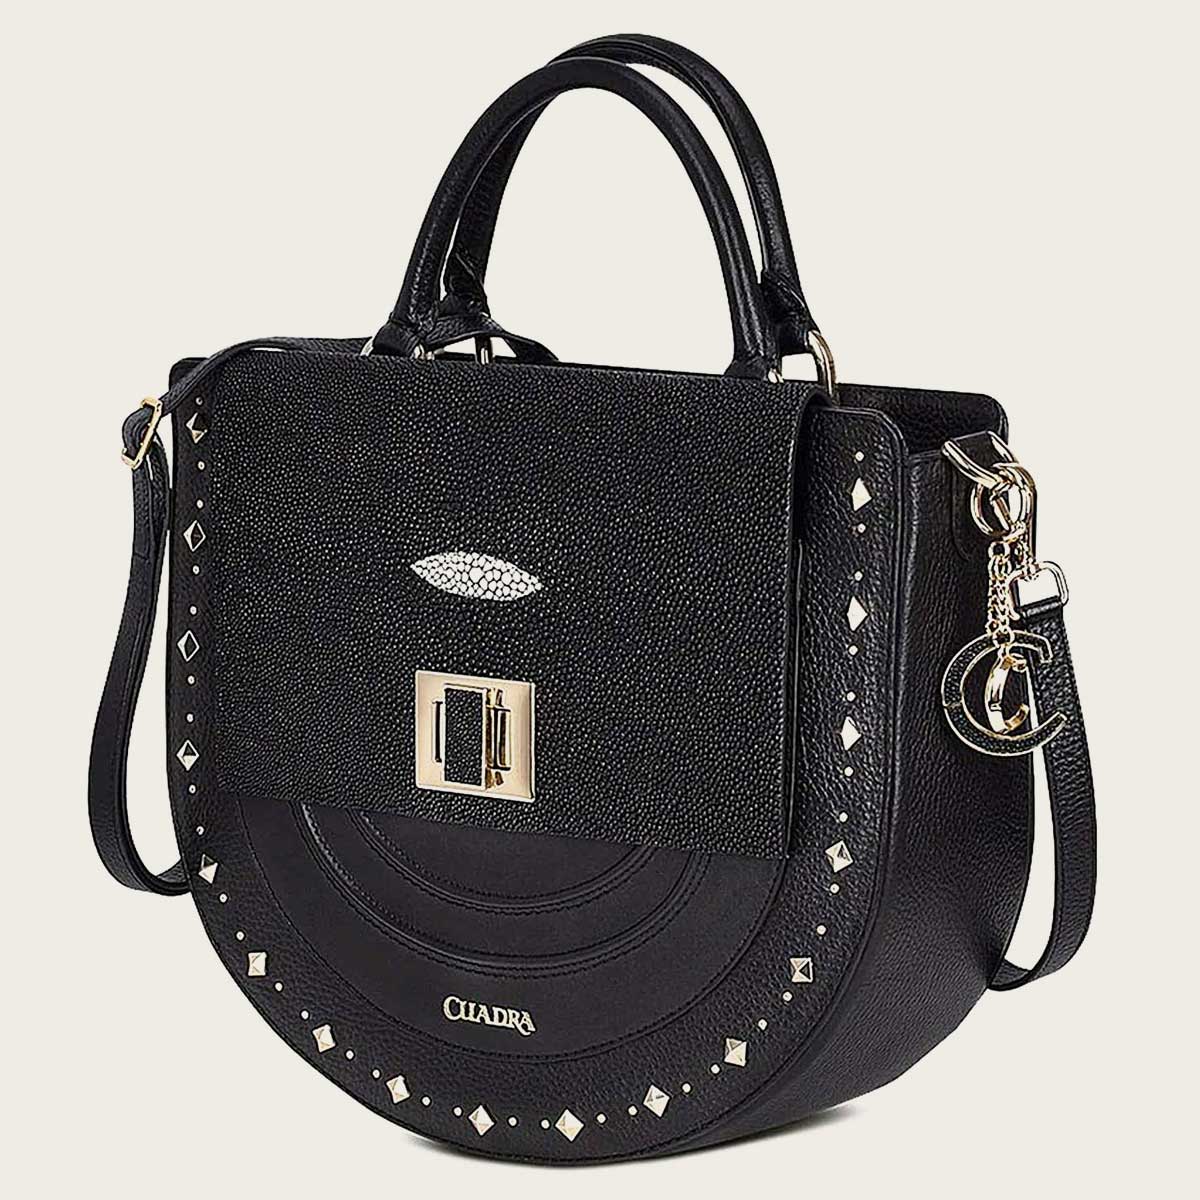 Elevate your style with this black handbag crafted from genuine stingray leather, adorned with studs for a chic and edgy look.